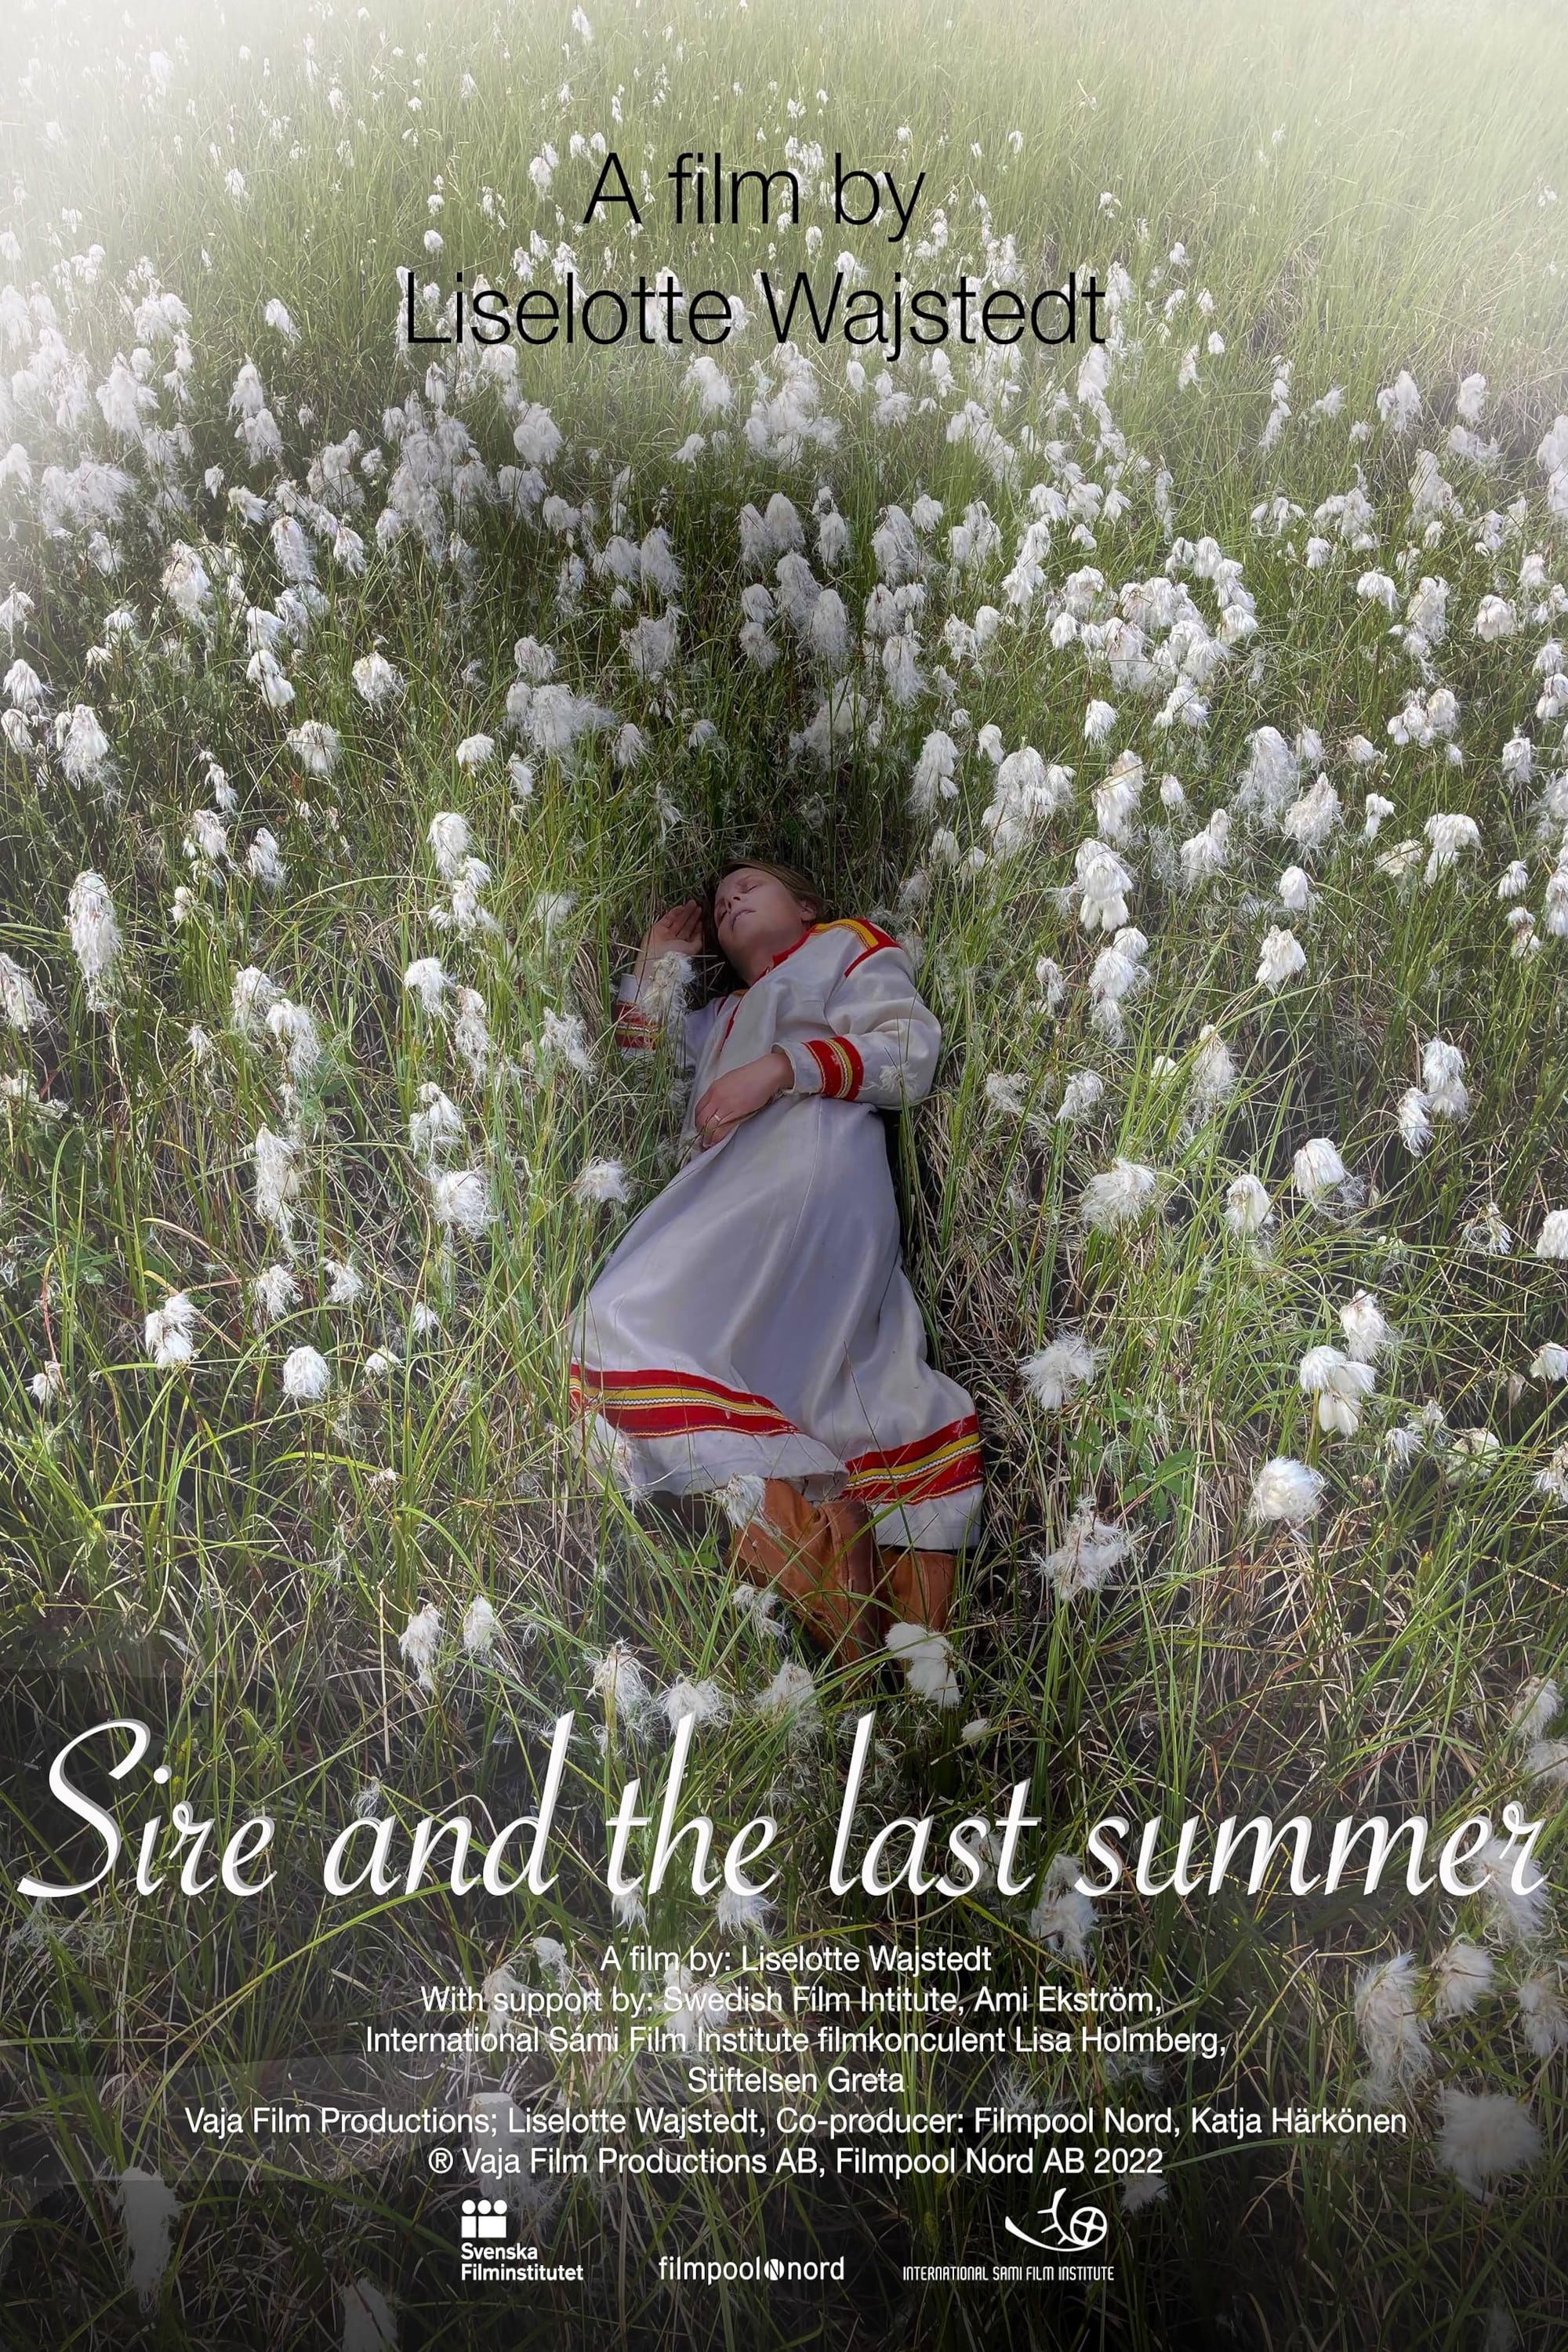 Sire and the last summer